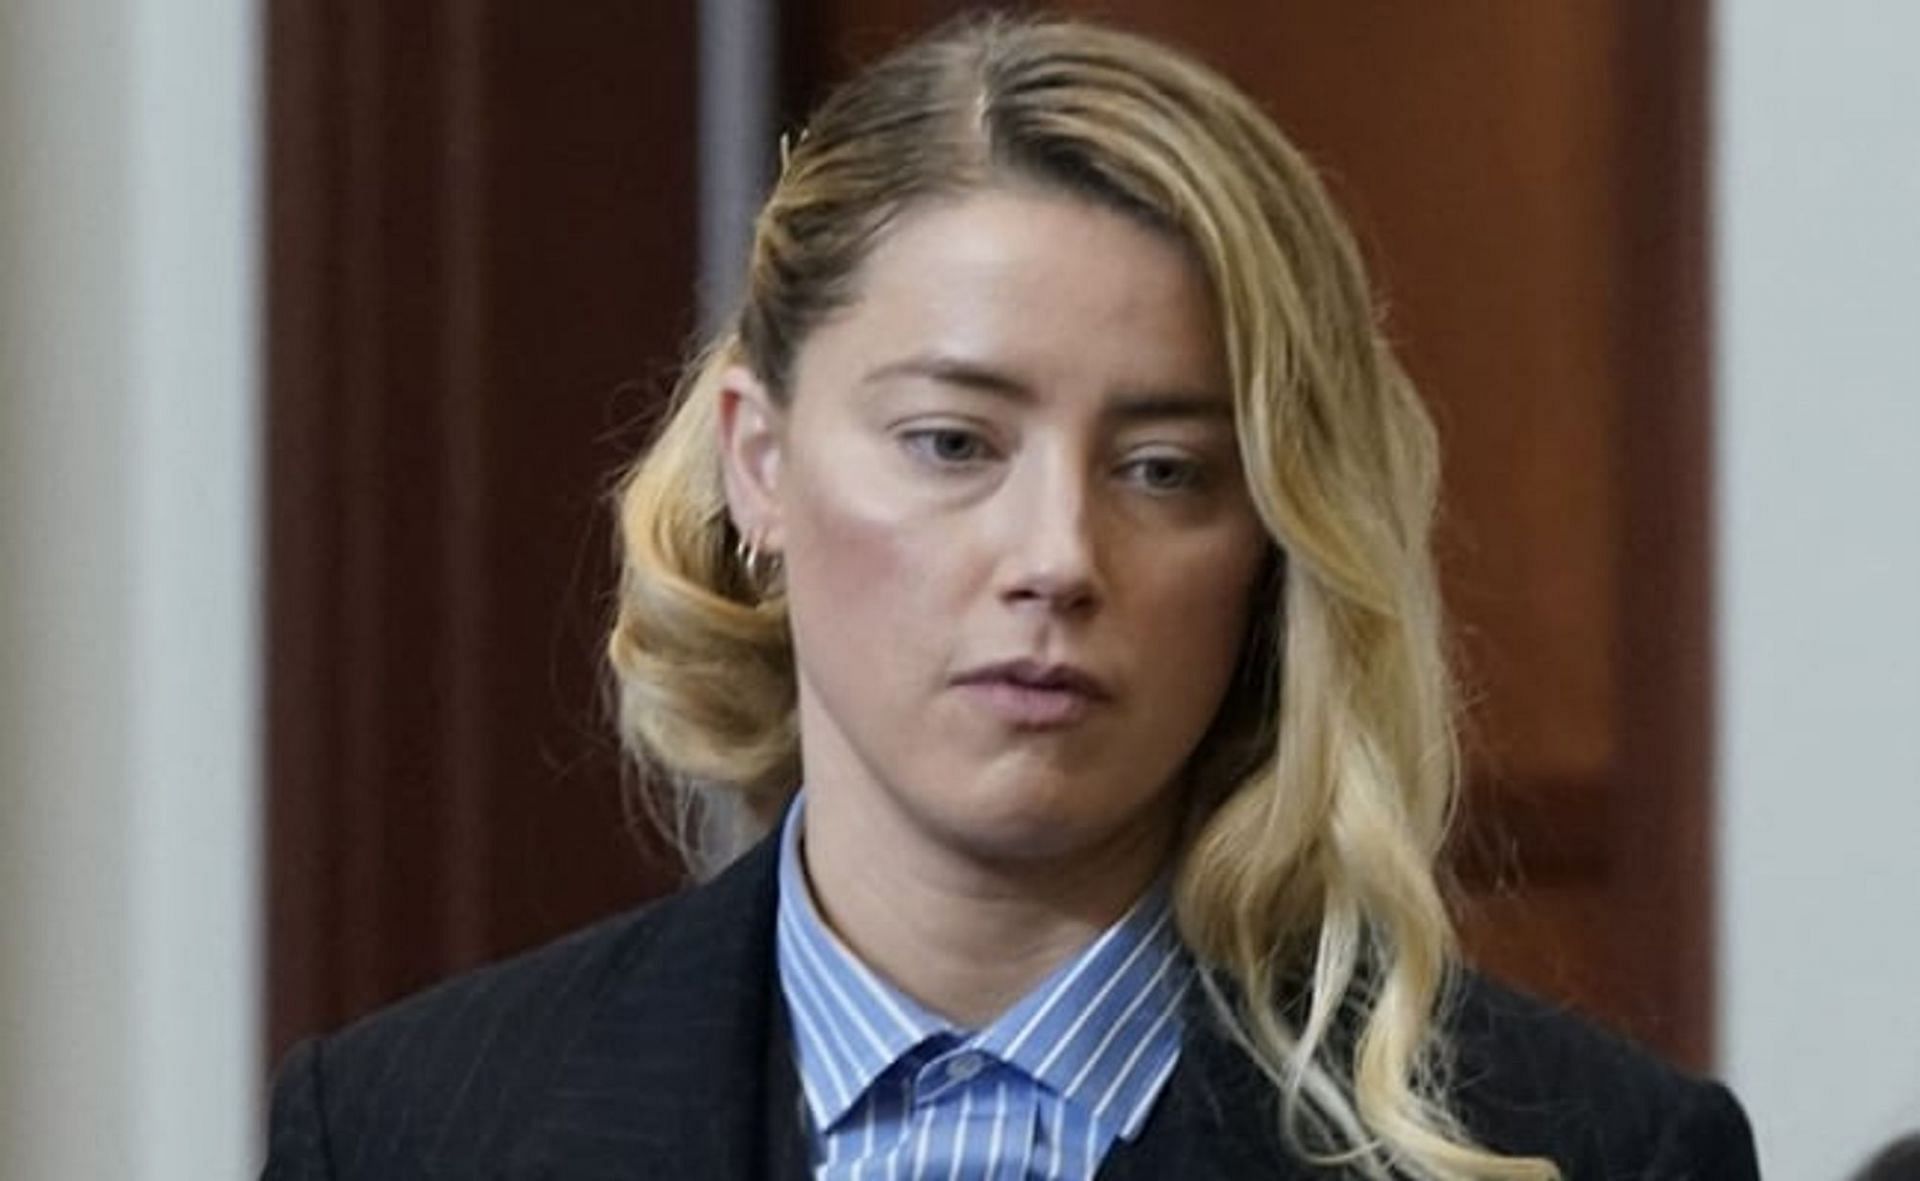 Amber Heard walks out of court after being grilled by Camille Vasquez (Image via Reuters)